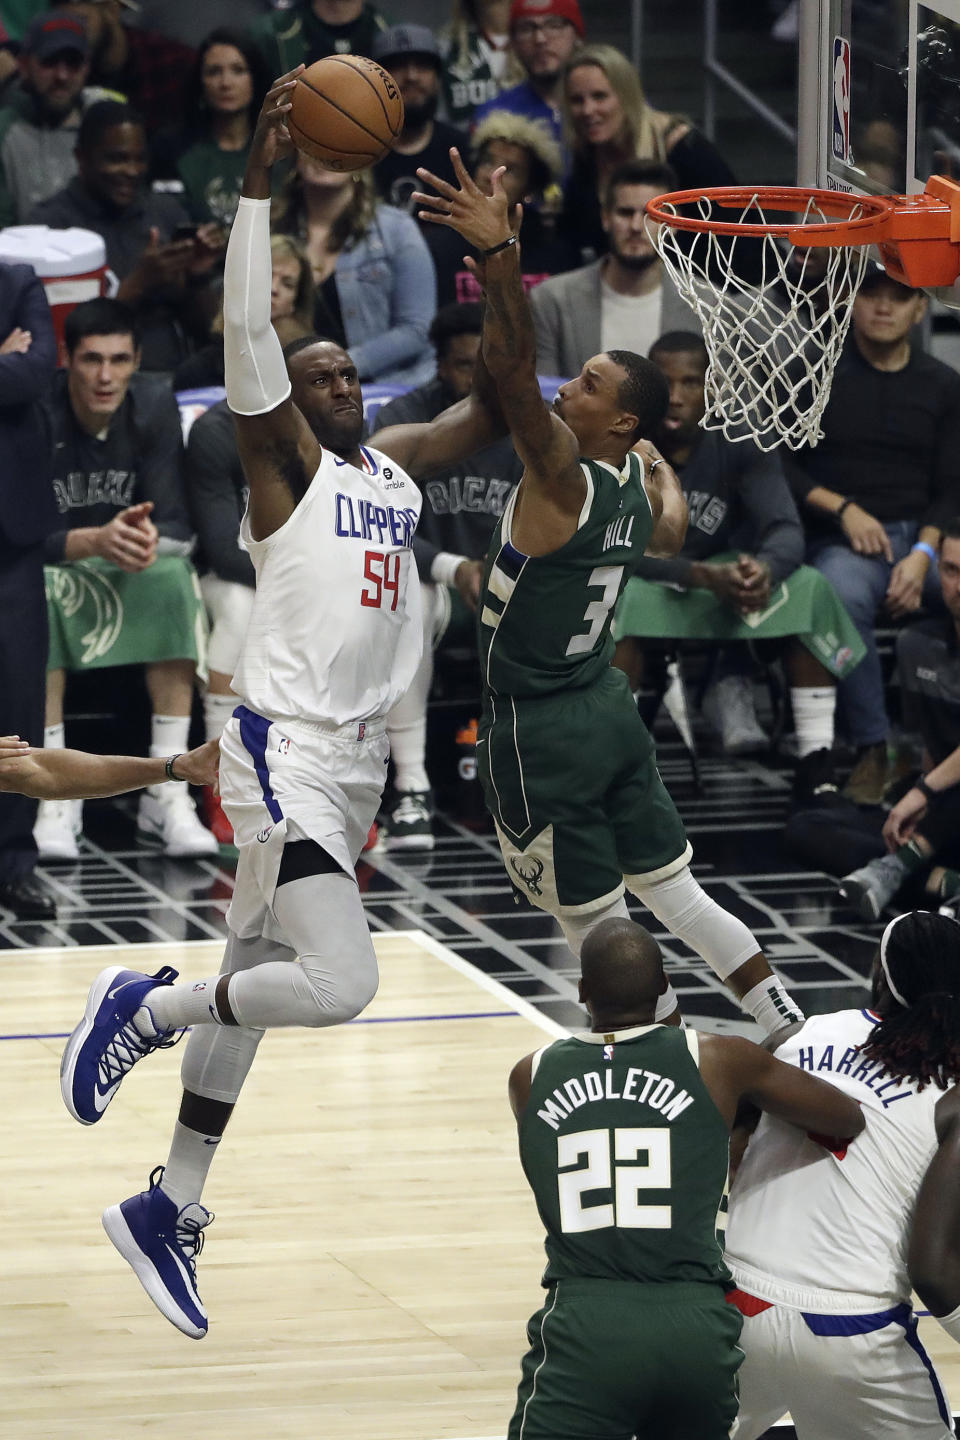 Los Angeles Clippers' Patrick Patterson (54) dunks past Milwaukee Bucks' George Hill (3) during the first half of an NBA basketball game Wednesday, Nov. 6, 2019, in Los Angeles. (AP Photo/Marcio Jose Sanchez)